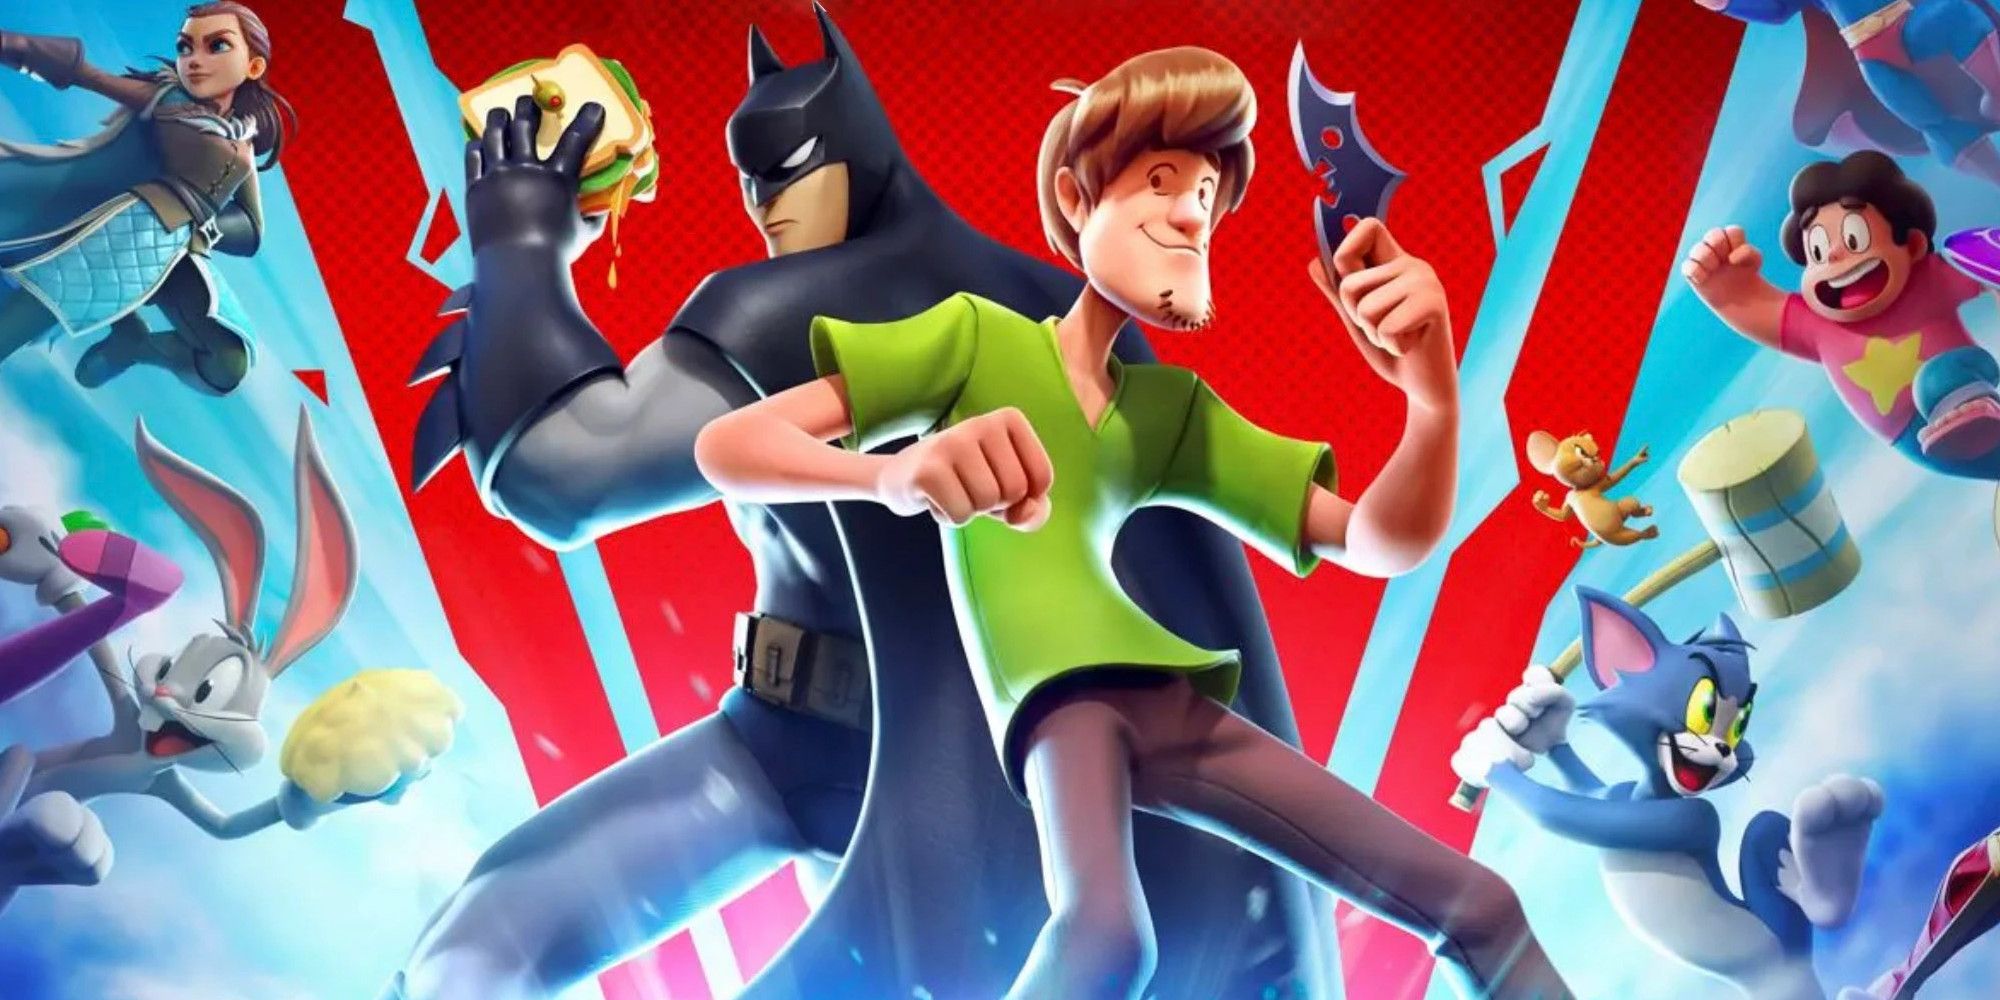 Batman and Shaggy teaming up in Multiversus, alongside Tom, Steven Universe, Bugs Bunny, and Arya Stark